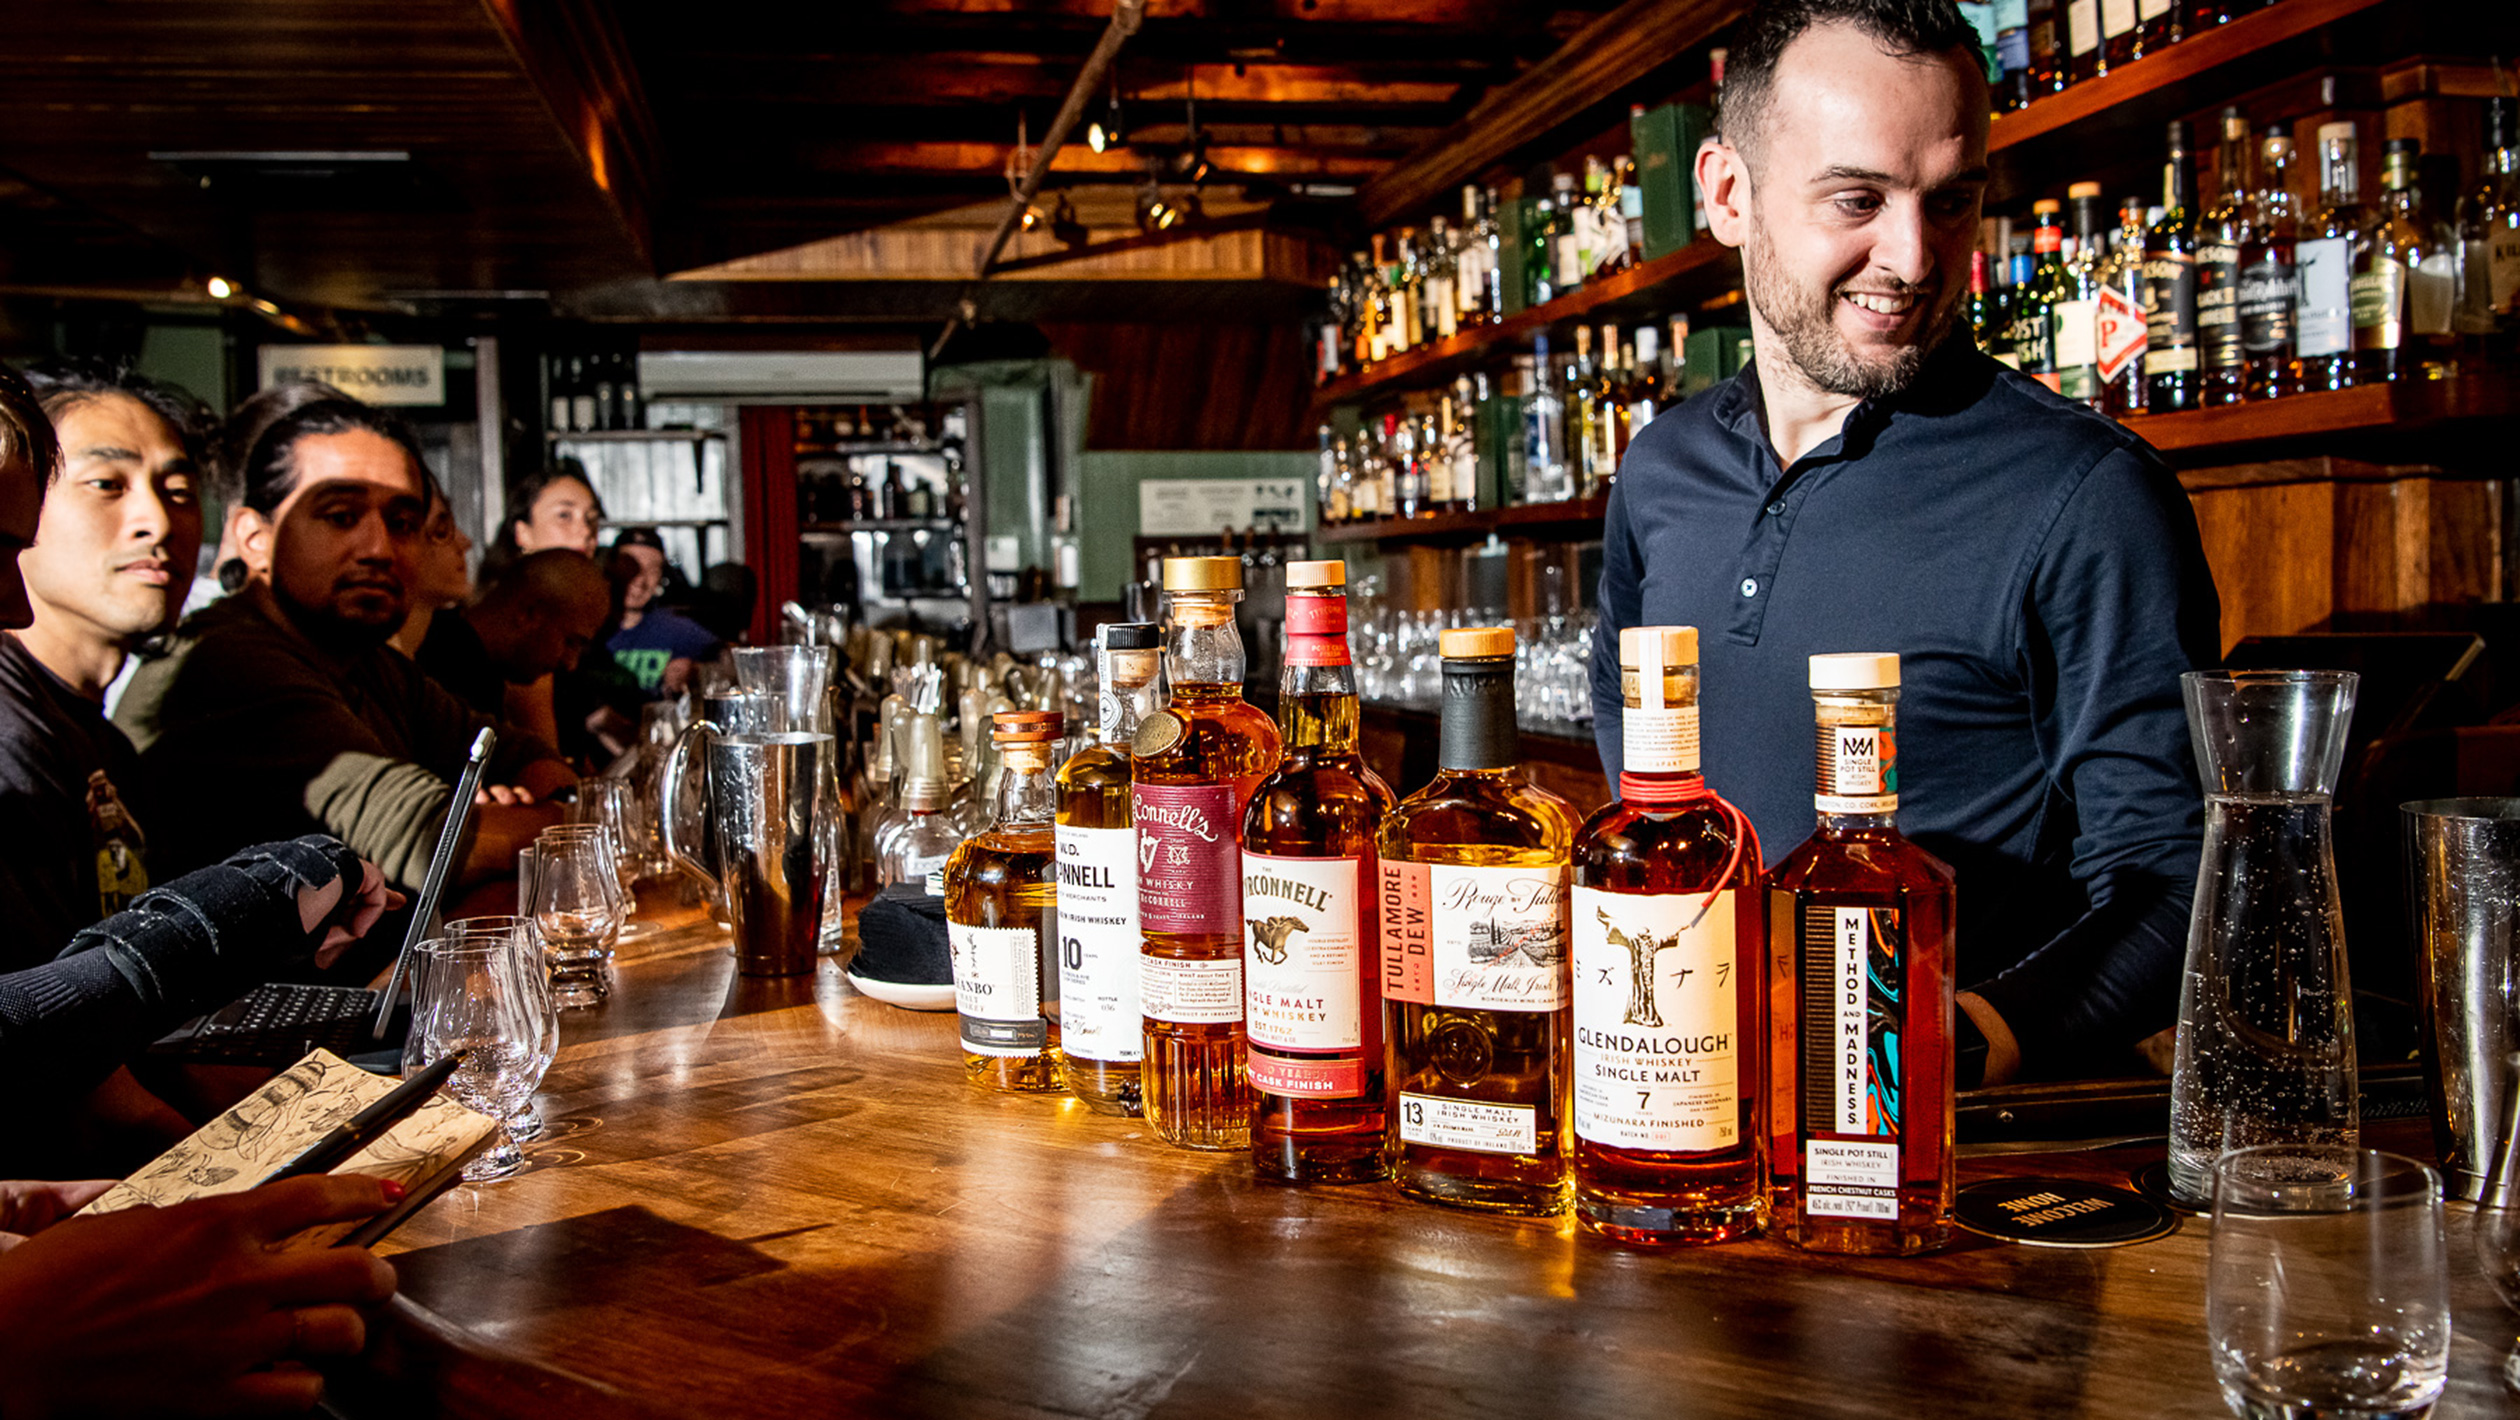 A candid photo of Mark McLaughlin behind the bar with a lineup of Irish whiskey on the bartop in front of him